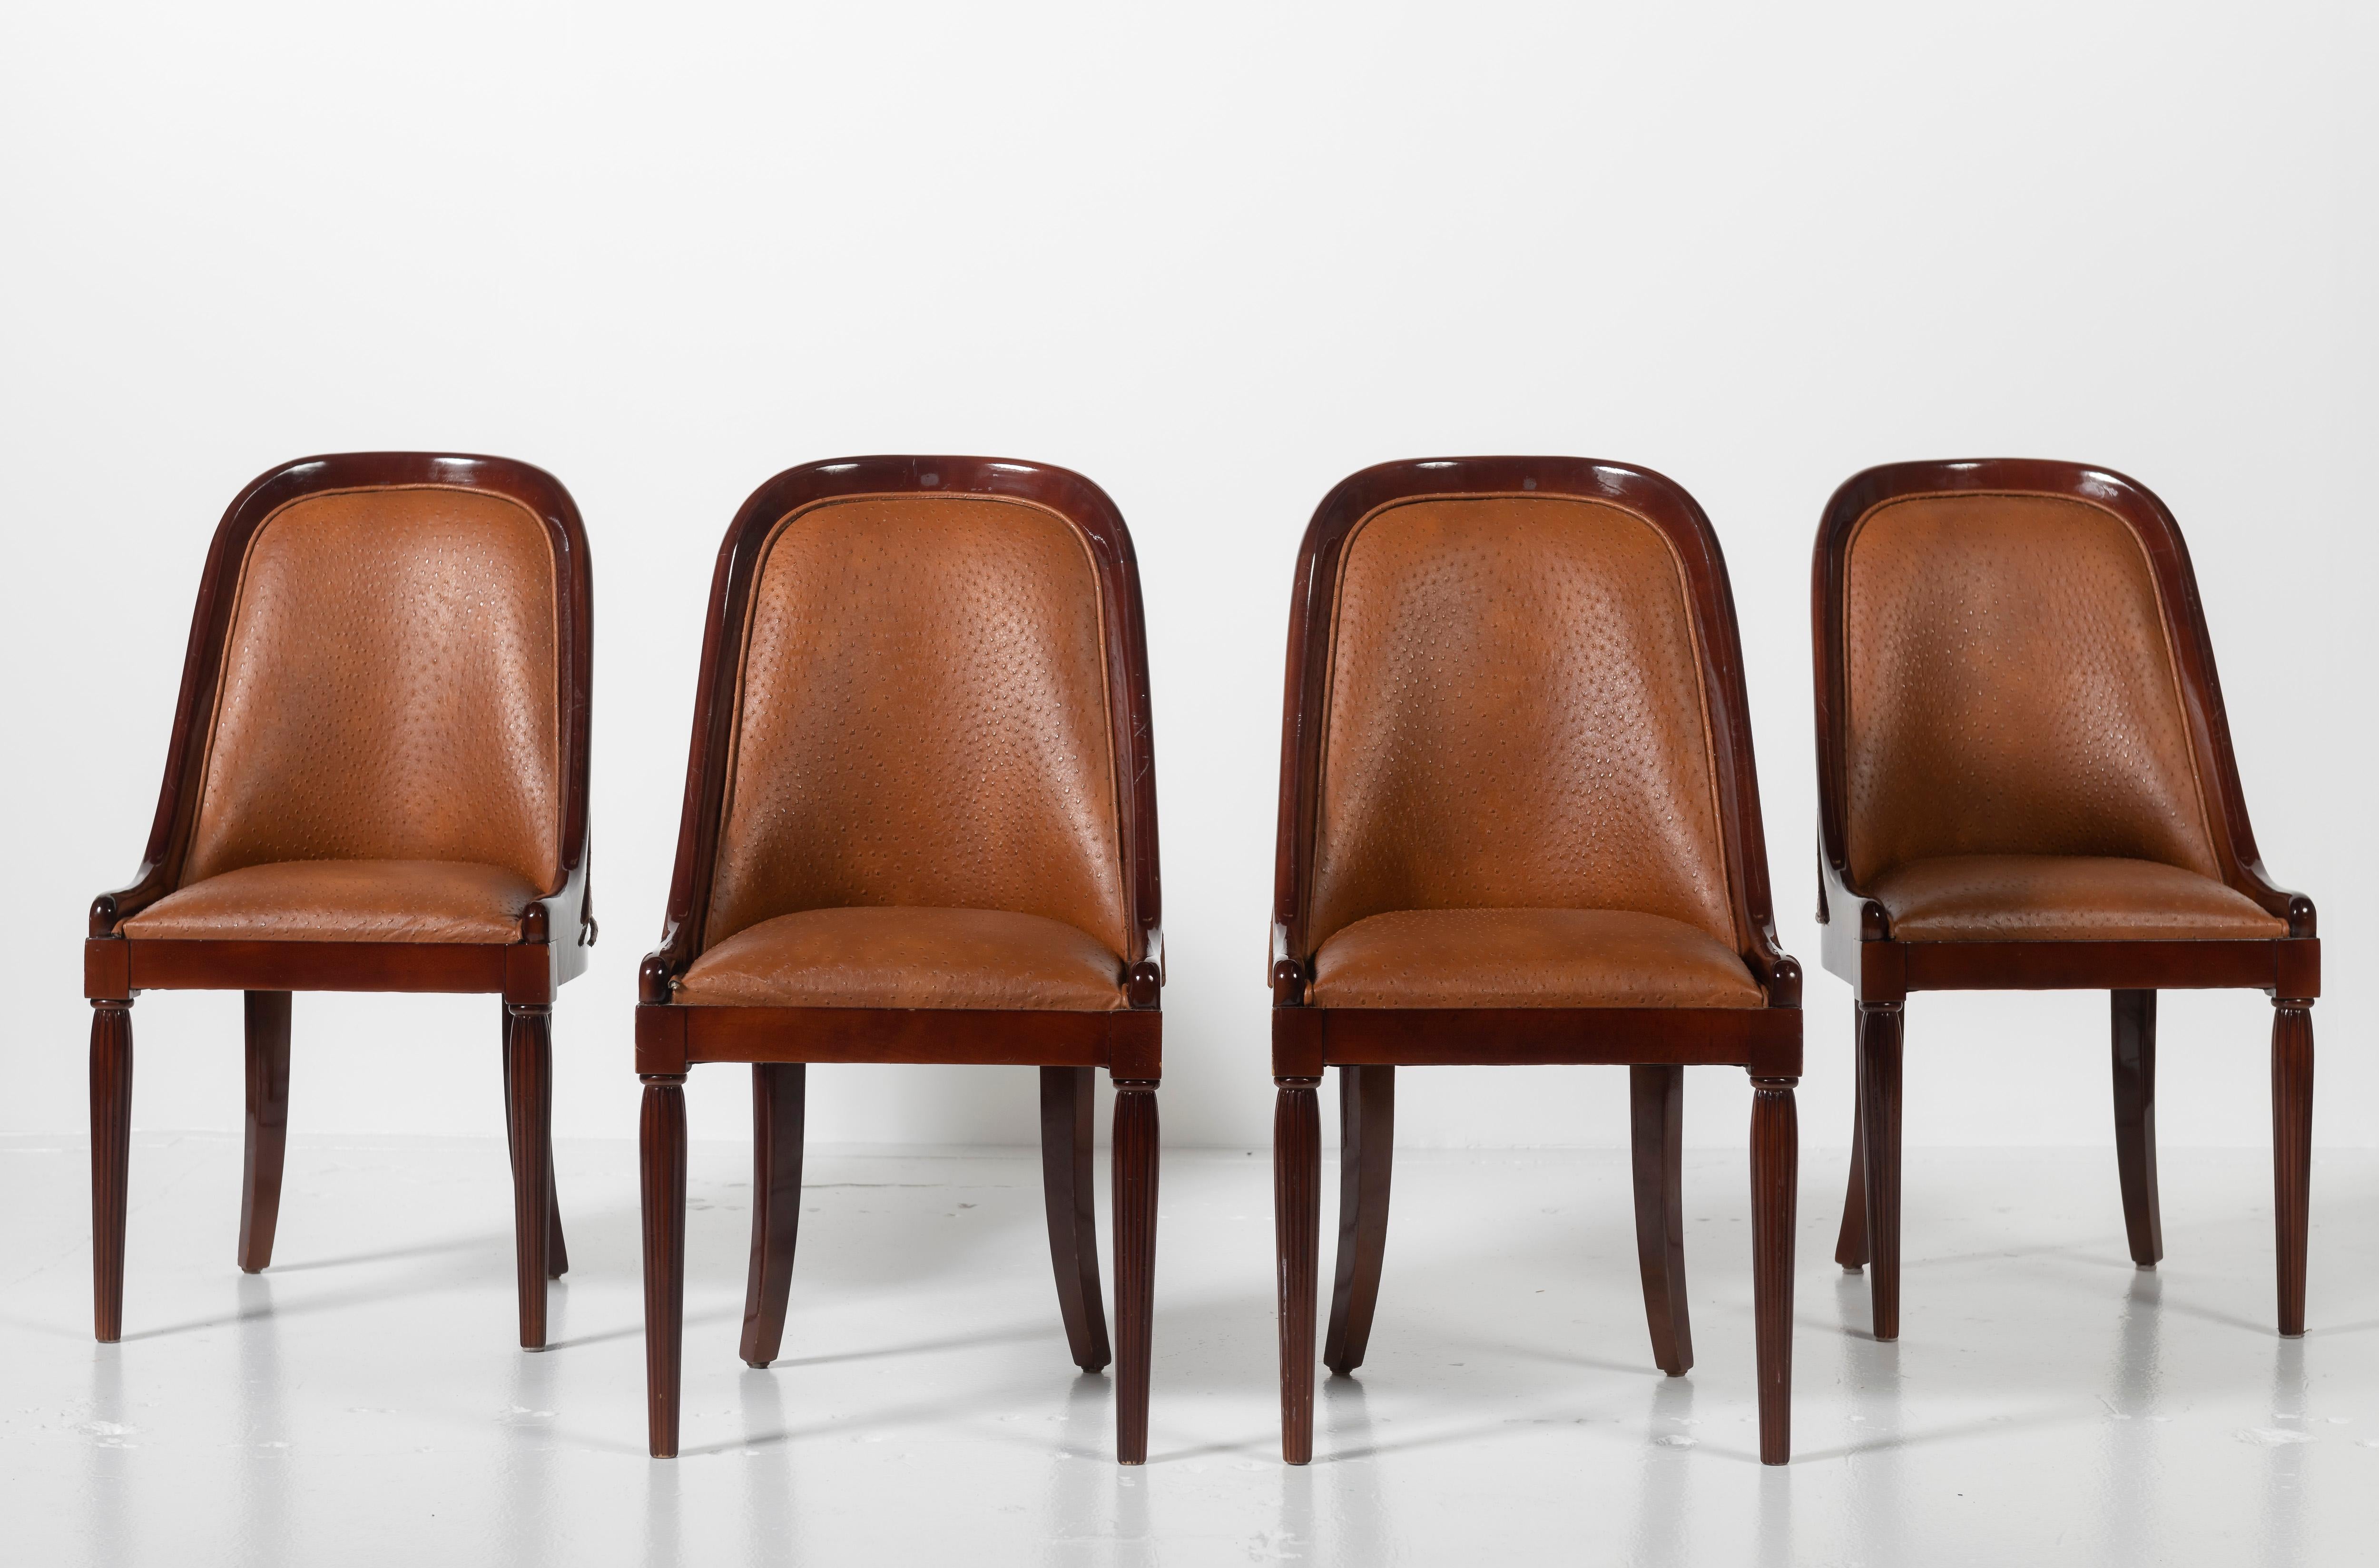 Set of four French Art Deco dining chairs in mahogany with ostrich leather upholstery and trim. These chairs are certain to lend sophistication to your table or as side chairs. The Chairs are in good condition, with some minor scratches to the wood.